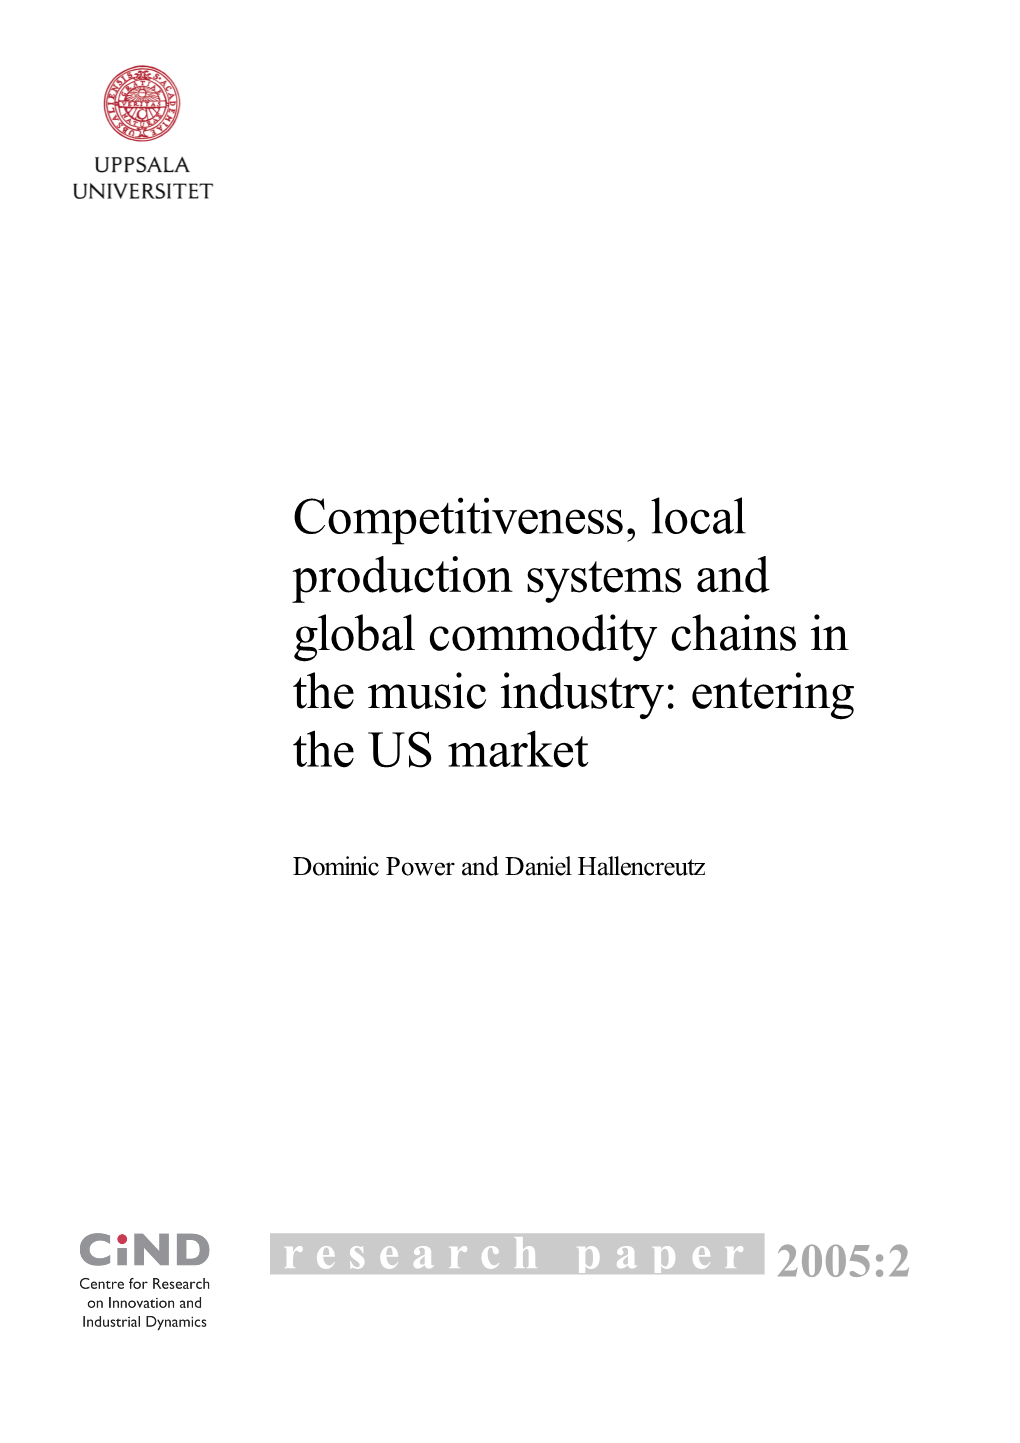 Competitiveness, Local Production Systems and Global Commodity Chains in the Music Industry: Entering the US Market